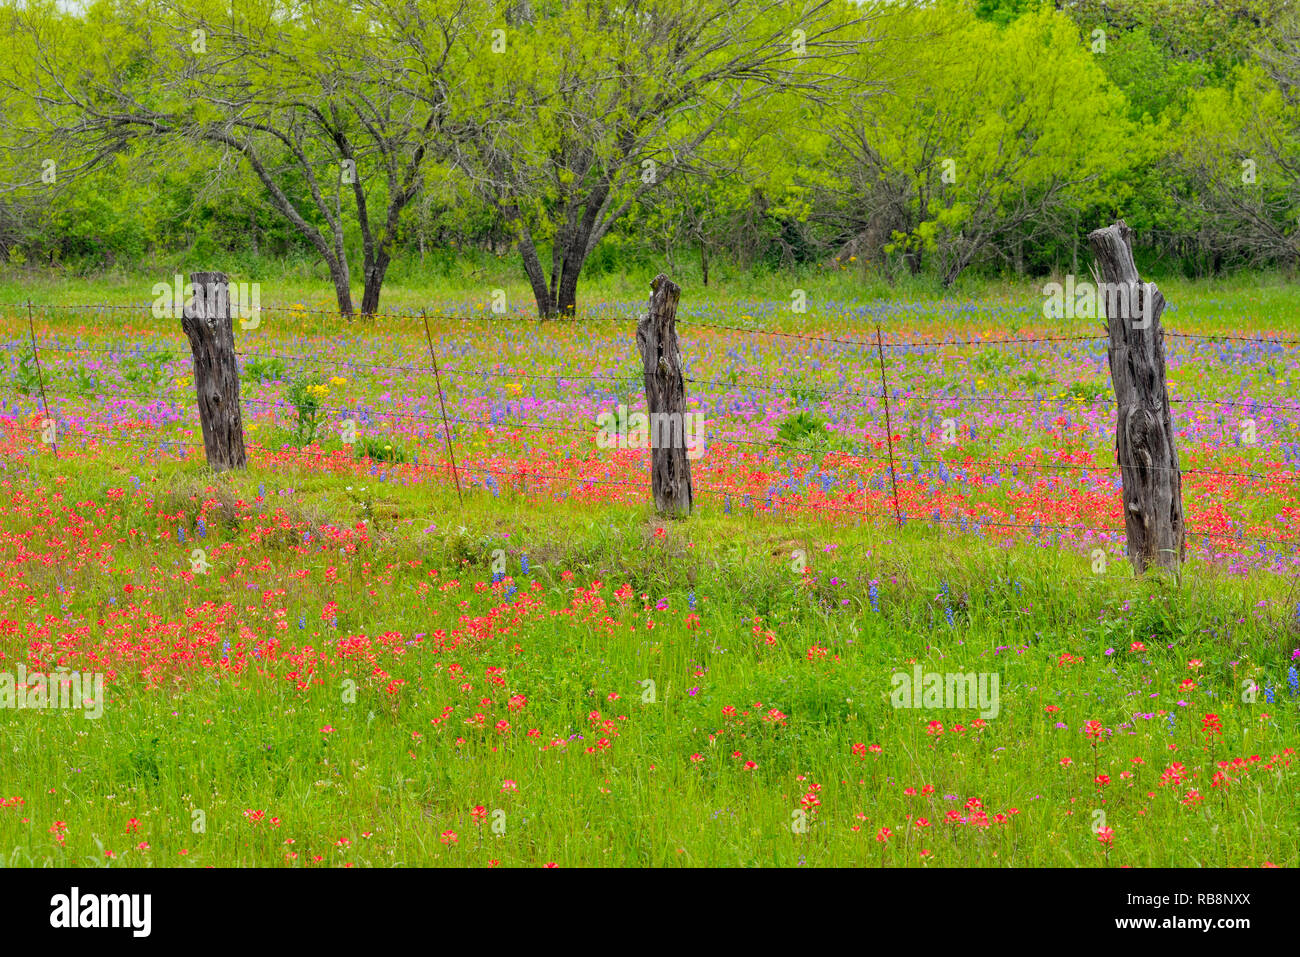 Texas wildflowers in bloom- paintbrush, phlox and bluebonnets, Seguin, Texas, USA Stock Photo